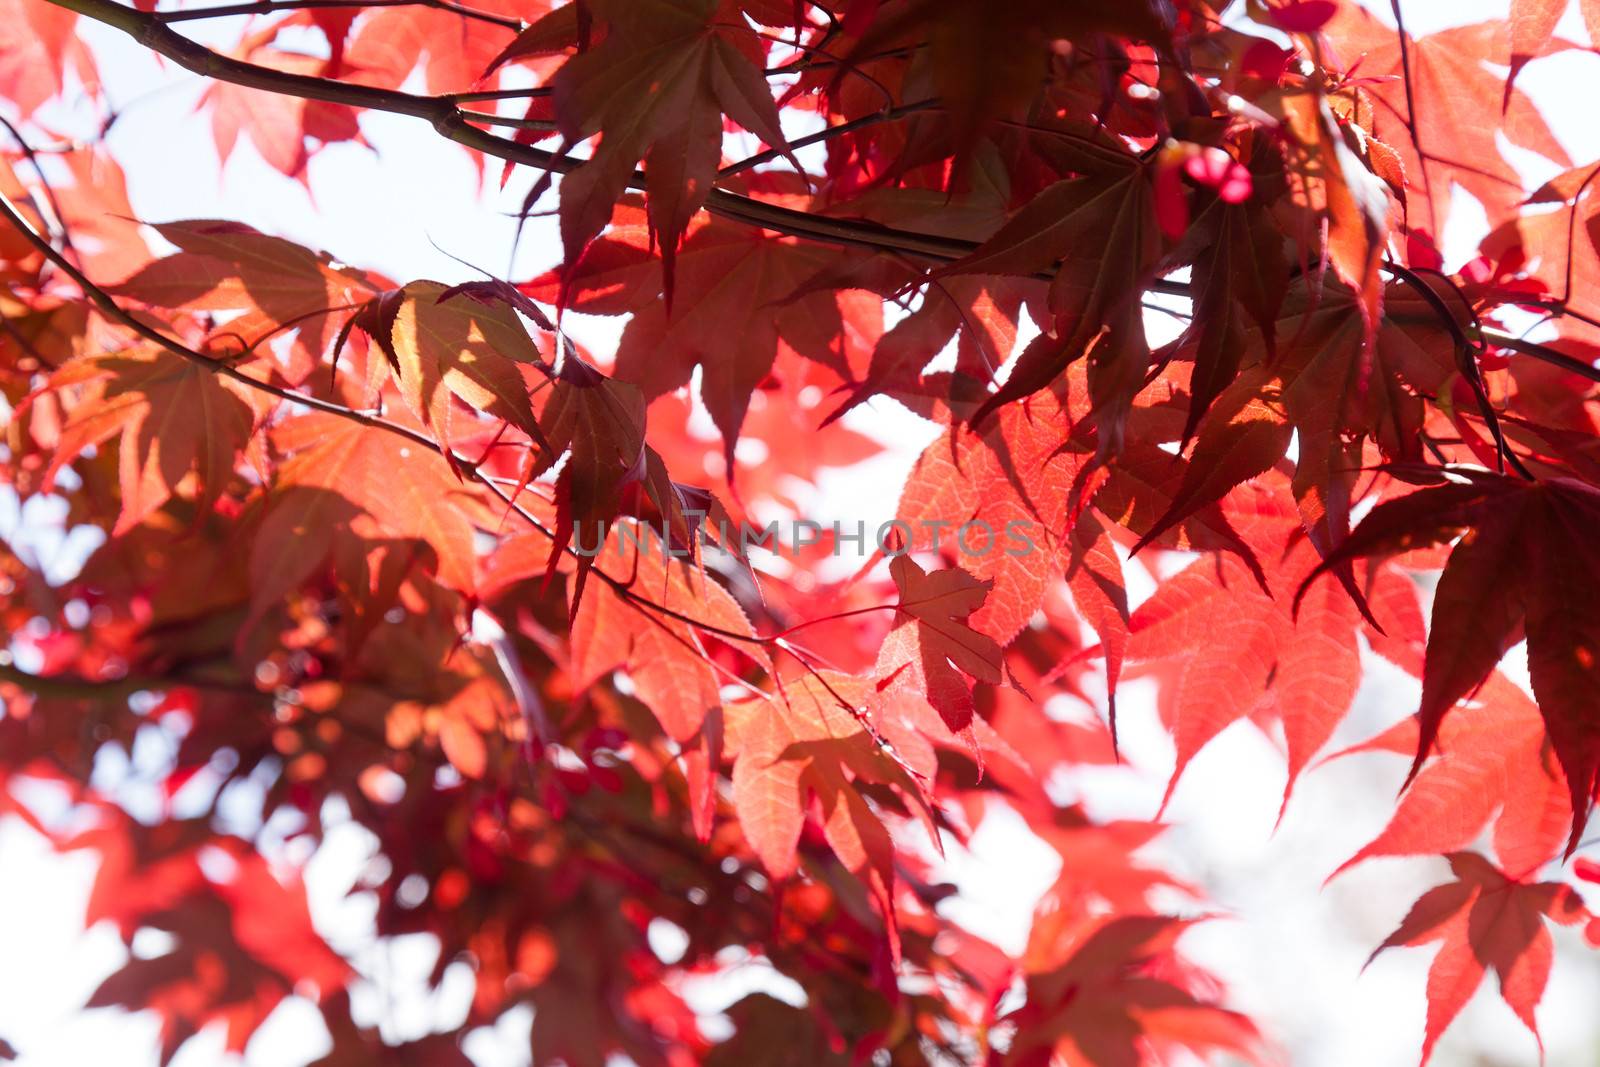 Red Maple by melastmohican